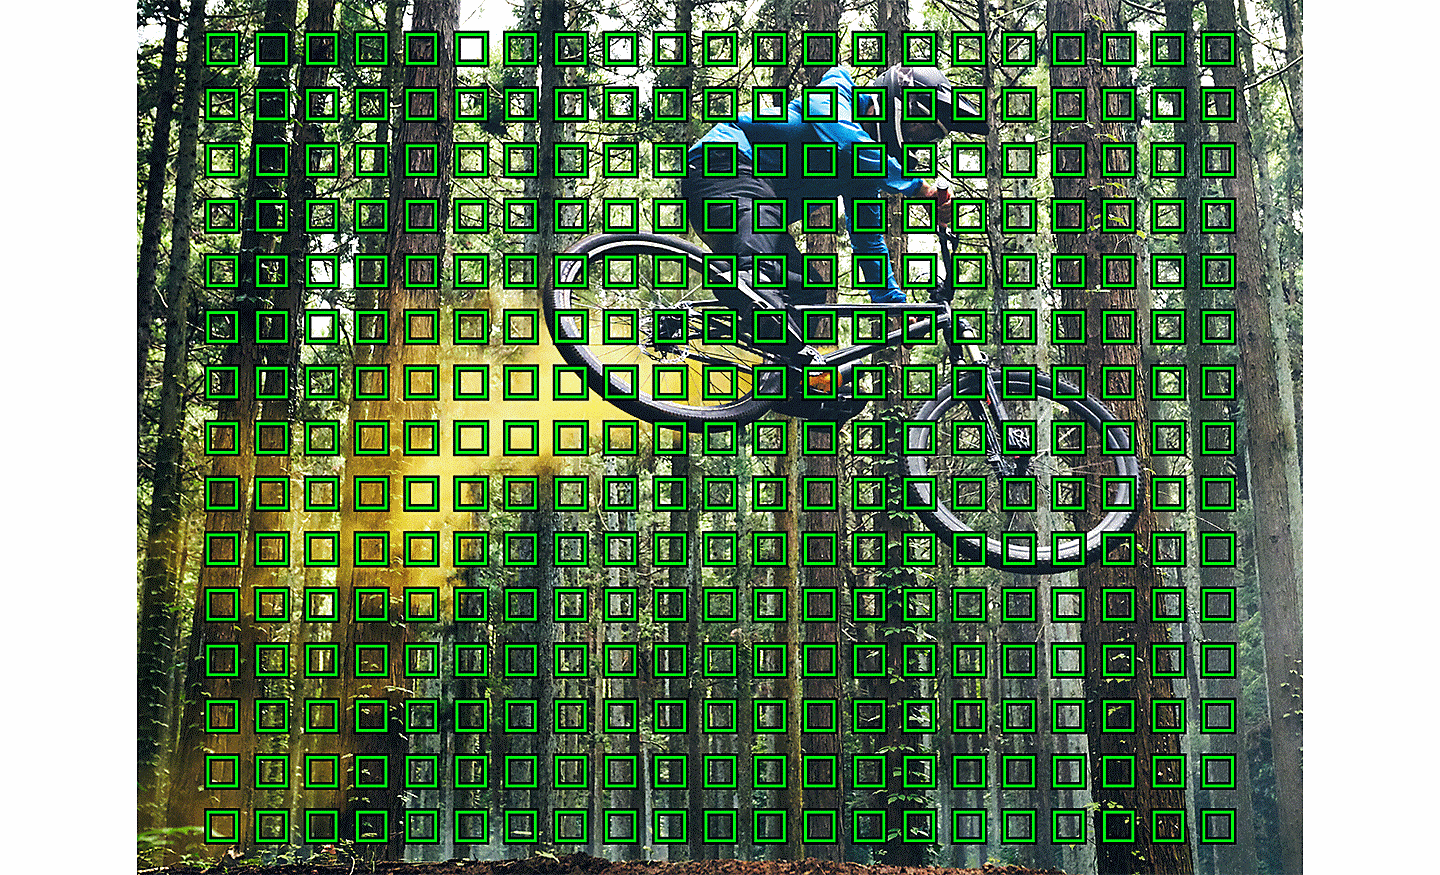 Image of mountain biker in woods, overlaid with multiple green squares representing AF points